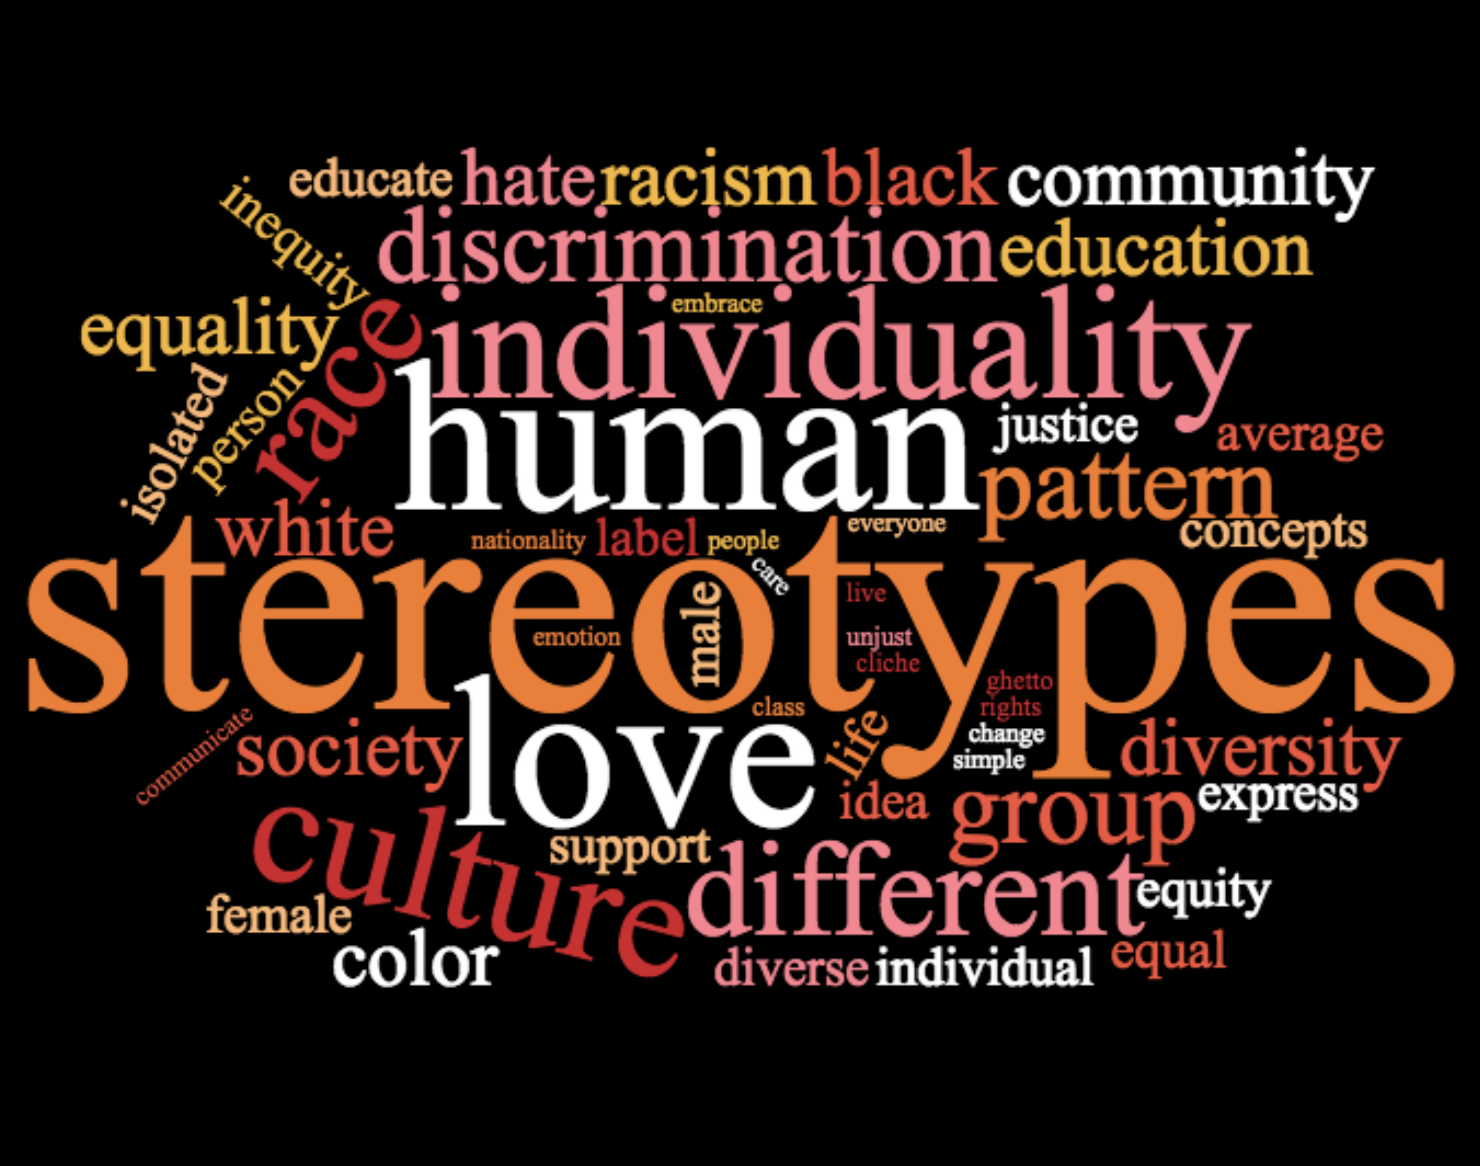 People often apply certain traits to certain stereotypes. Graphic by Coraline Pettine.